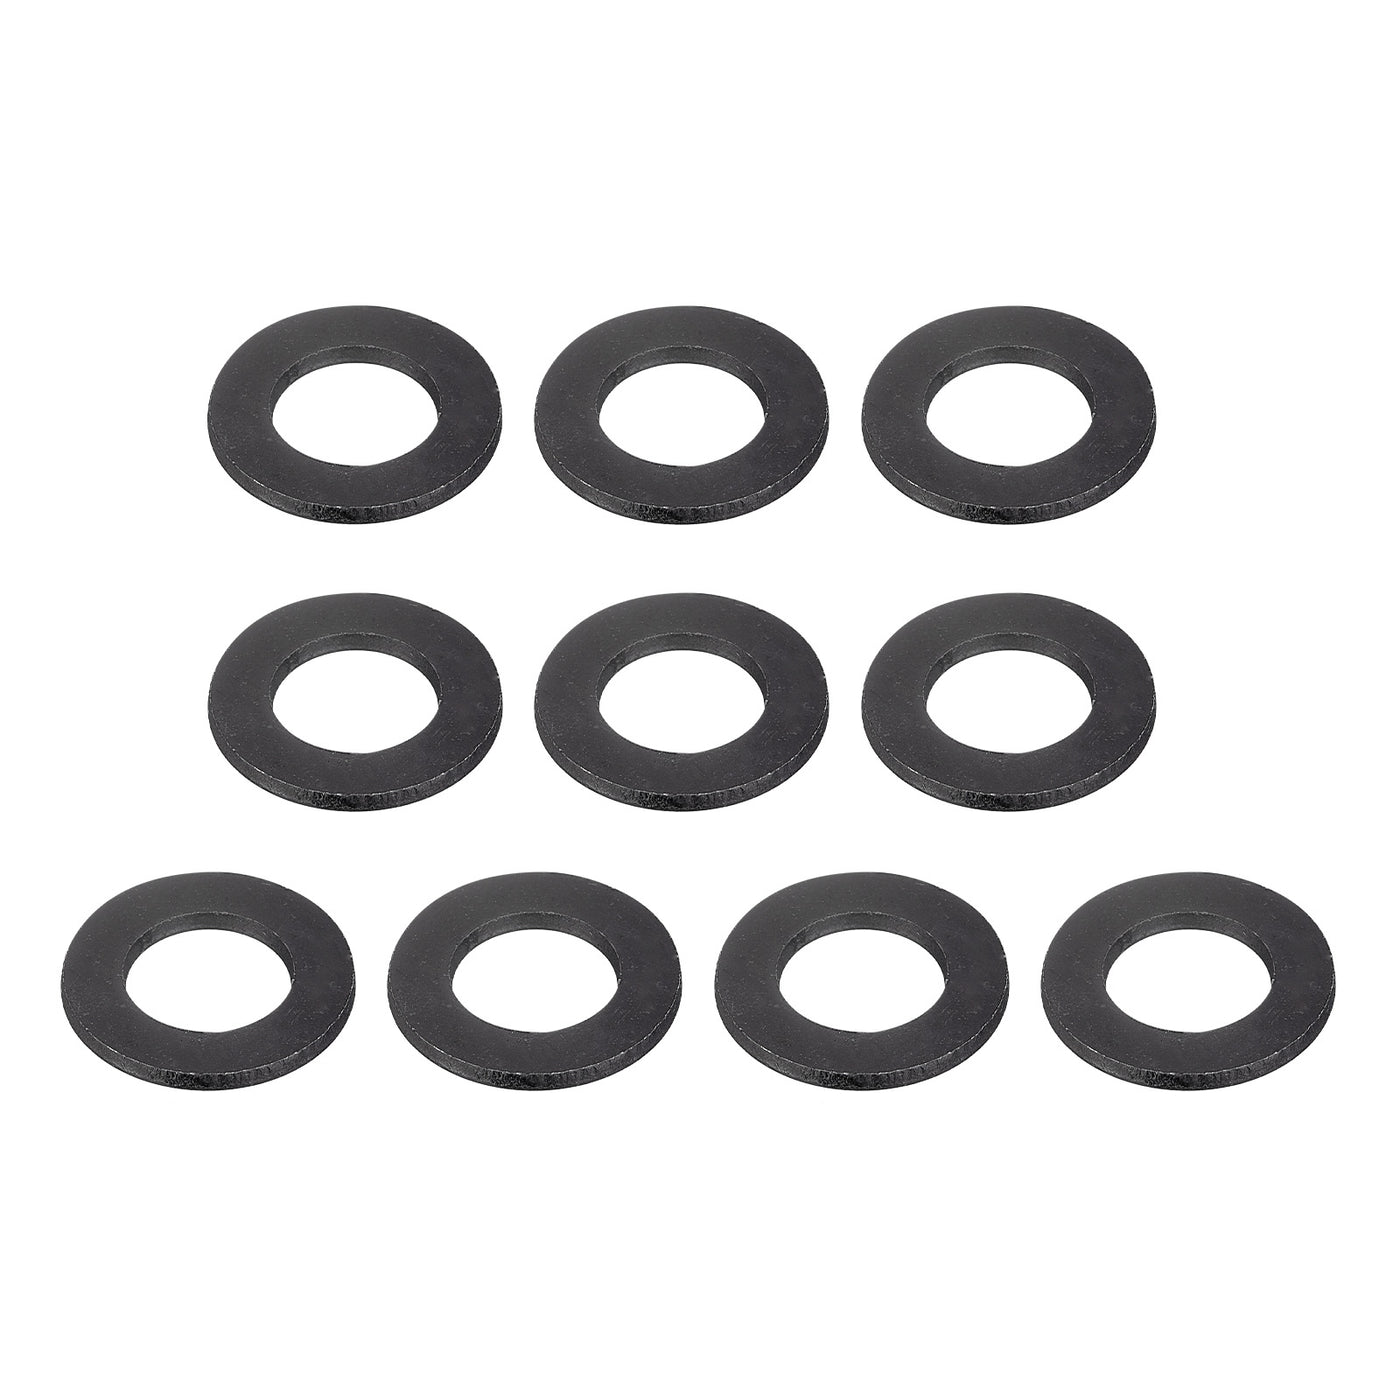 uxcell Uxcell M14 Carbon Steel Flat Washer 25pcs 15x27.8x2.4mm Grade 8.8 Alloy Steel Fasteners